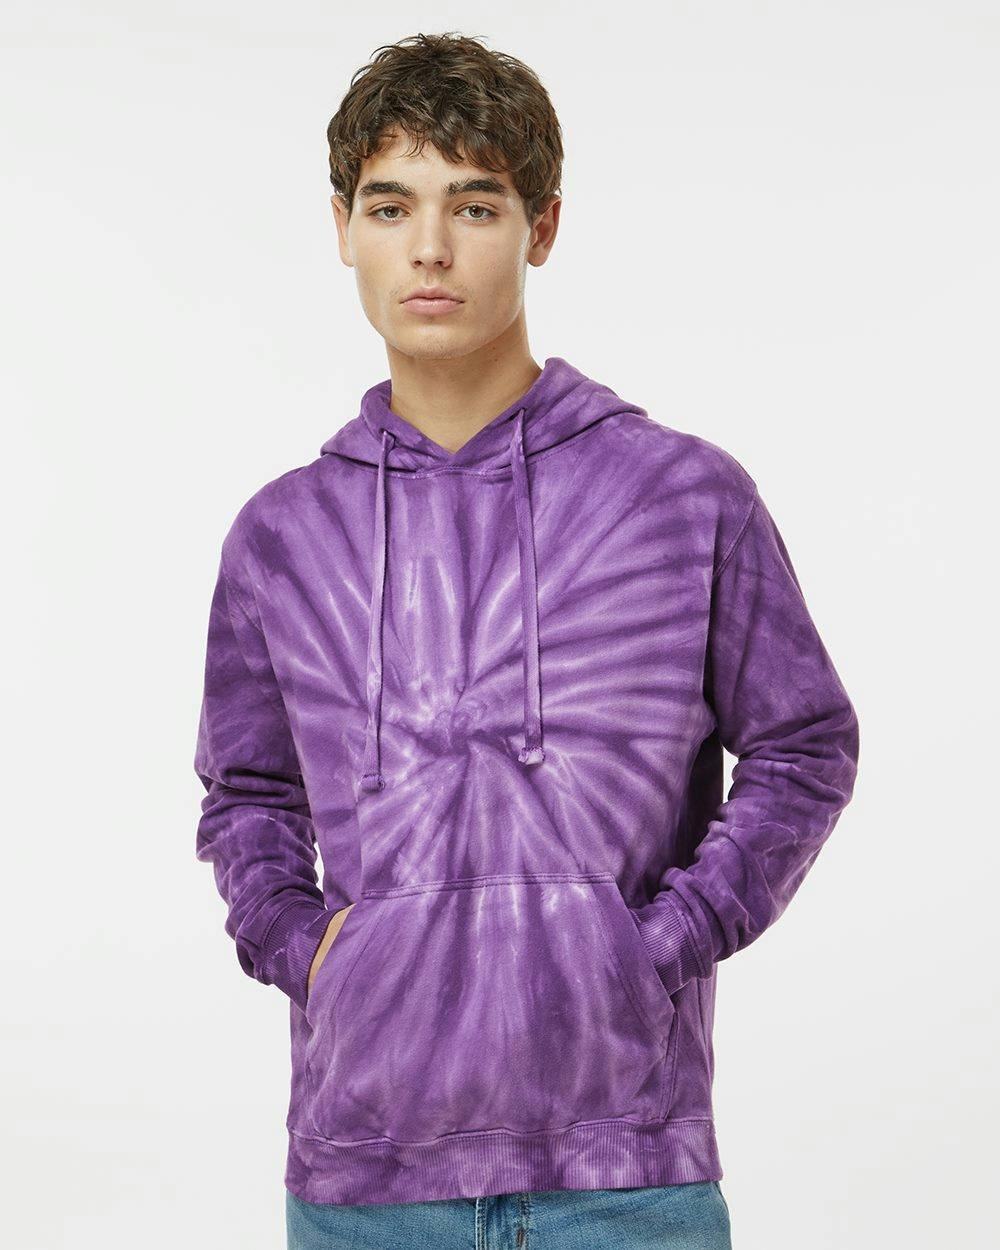 Image for Cyclone Tie-Dyed Hooded Sweatshirt - 854CY